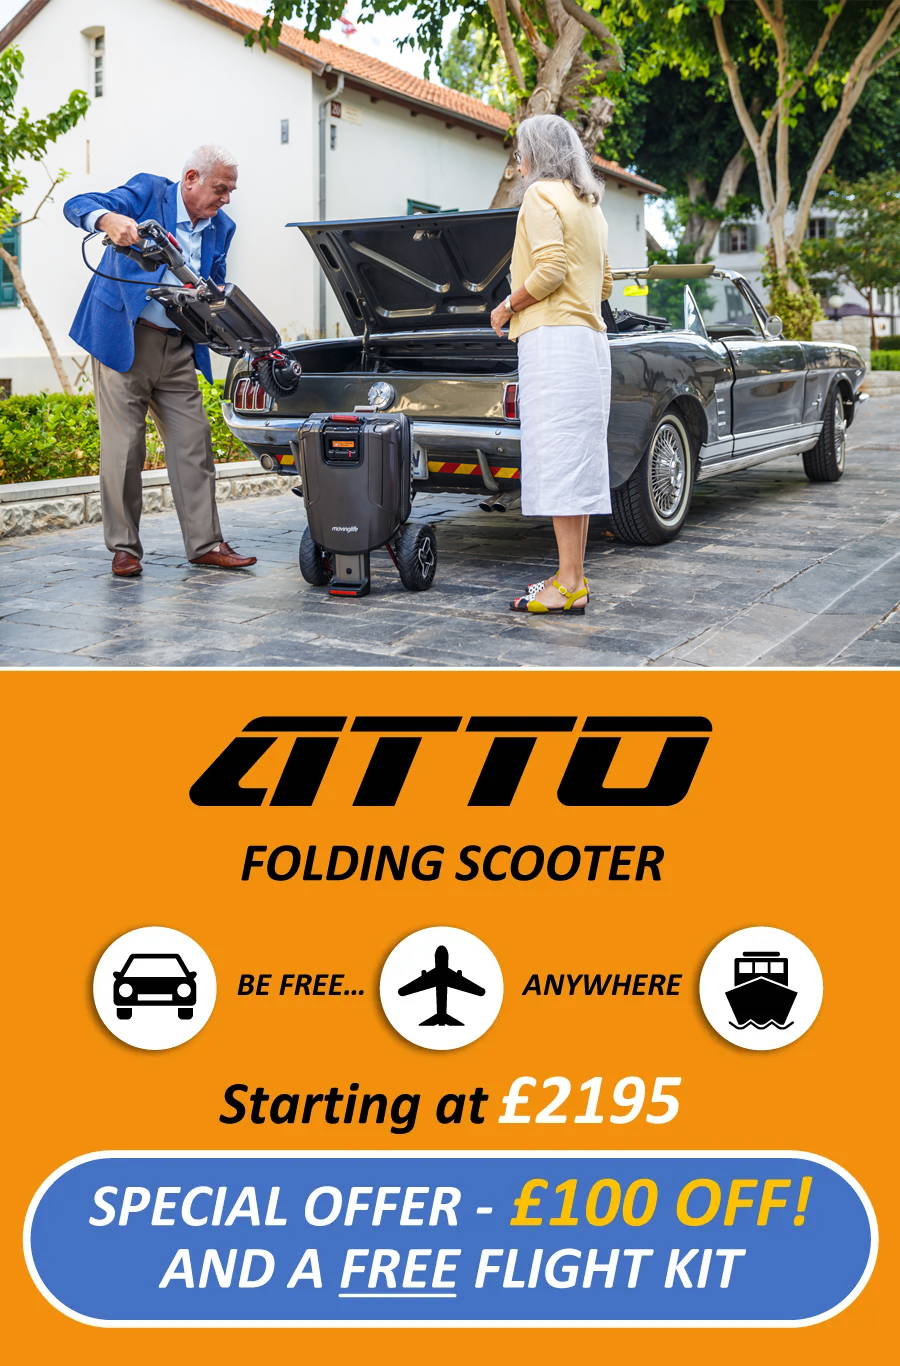 Atto Mobility folding scooter